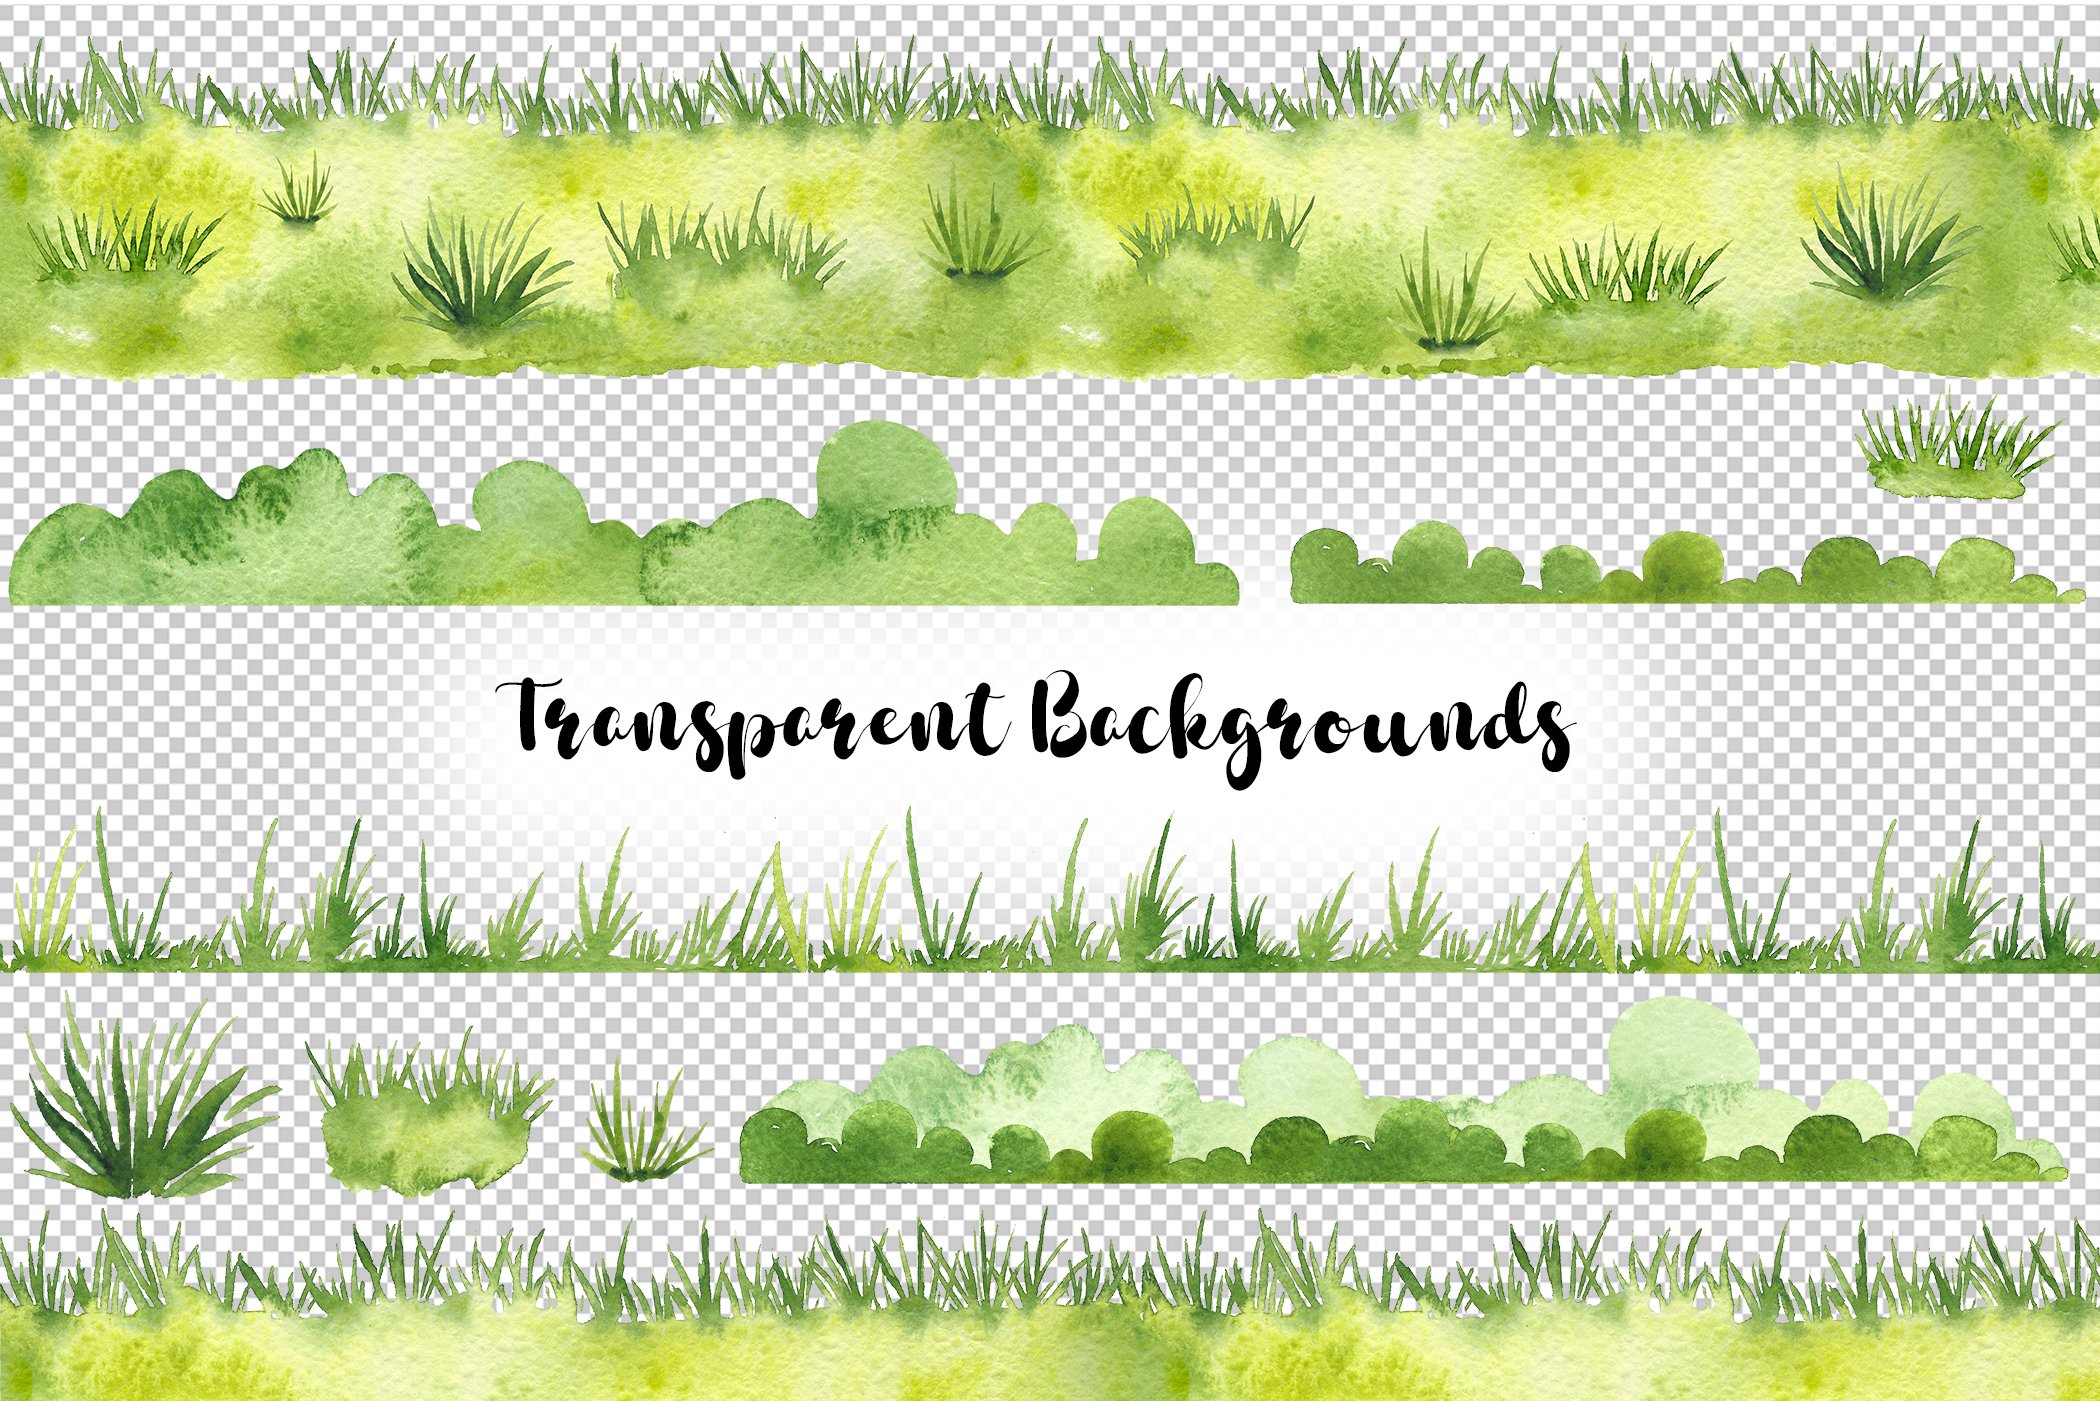 Transparent backgrounds for your green watercolor grass.